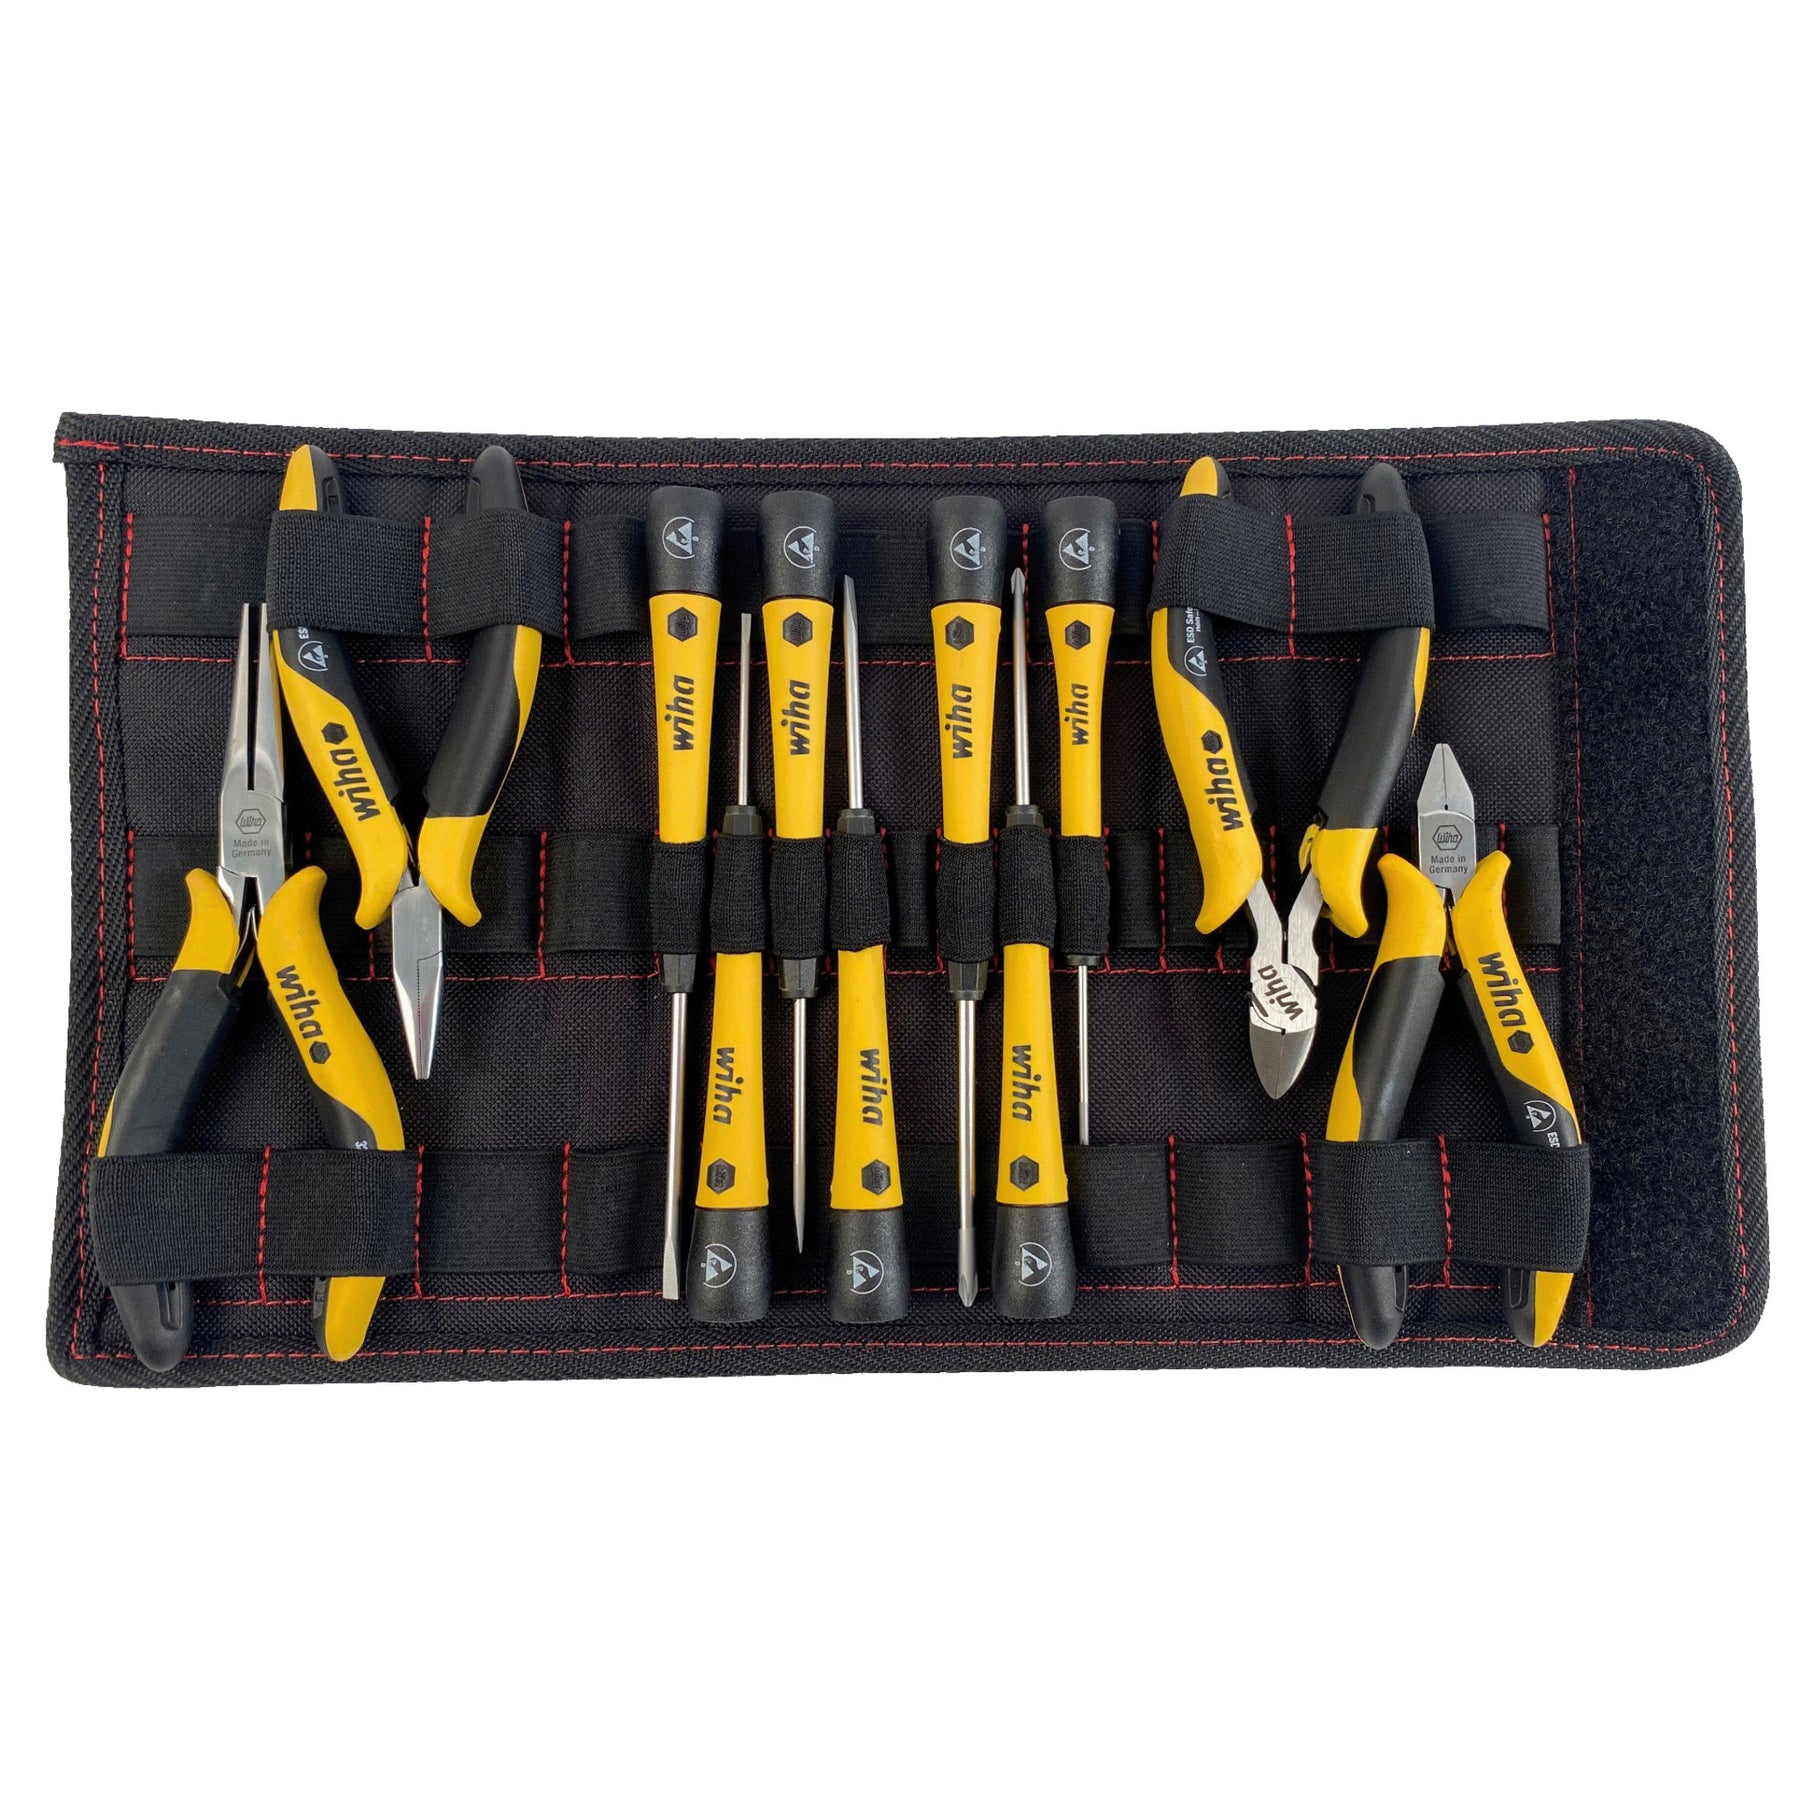 11 Piece ESD Safe PicoFinish Precision Screwdrivers and Pliers Set in